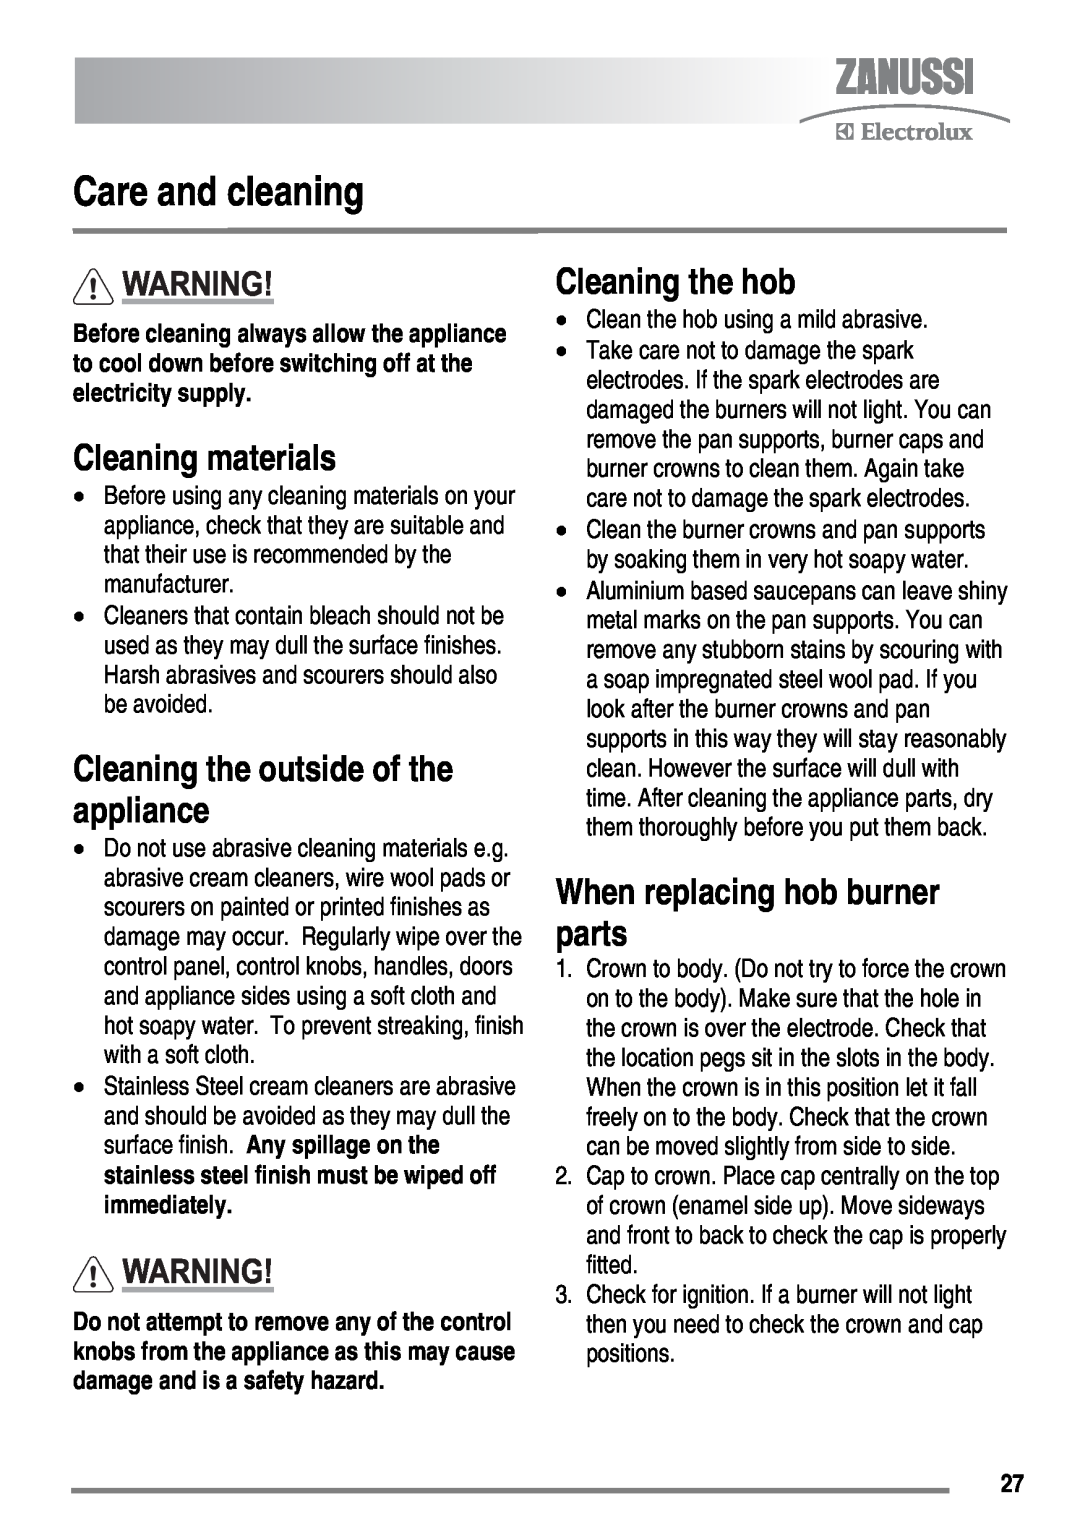 Zanussi ZKG6040 user manual Care and cleaning, Cleaning materials, Cleaning the outside of the appliance, Cleaning the hob 